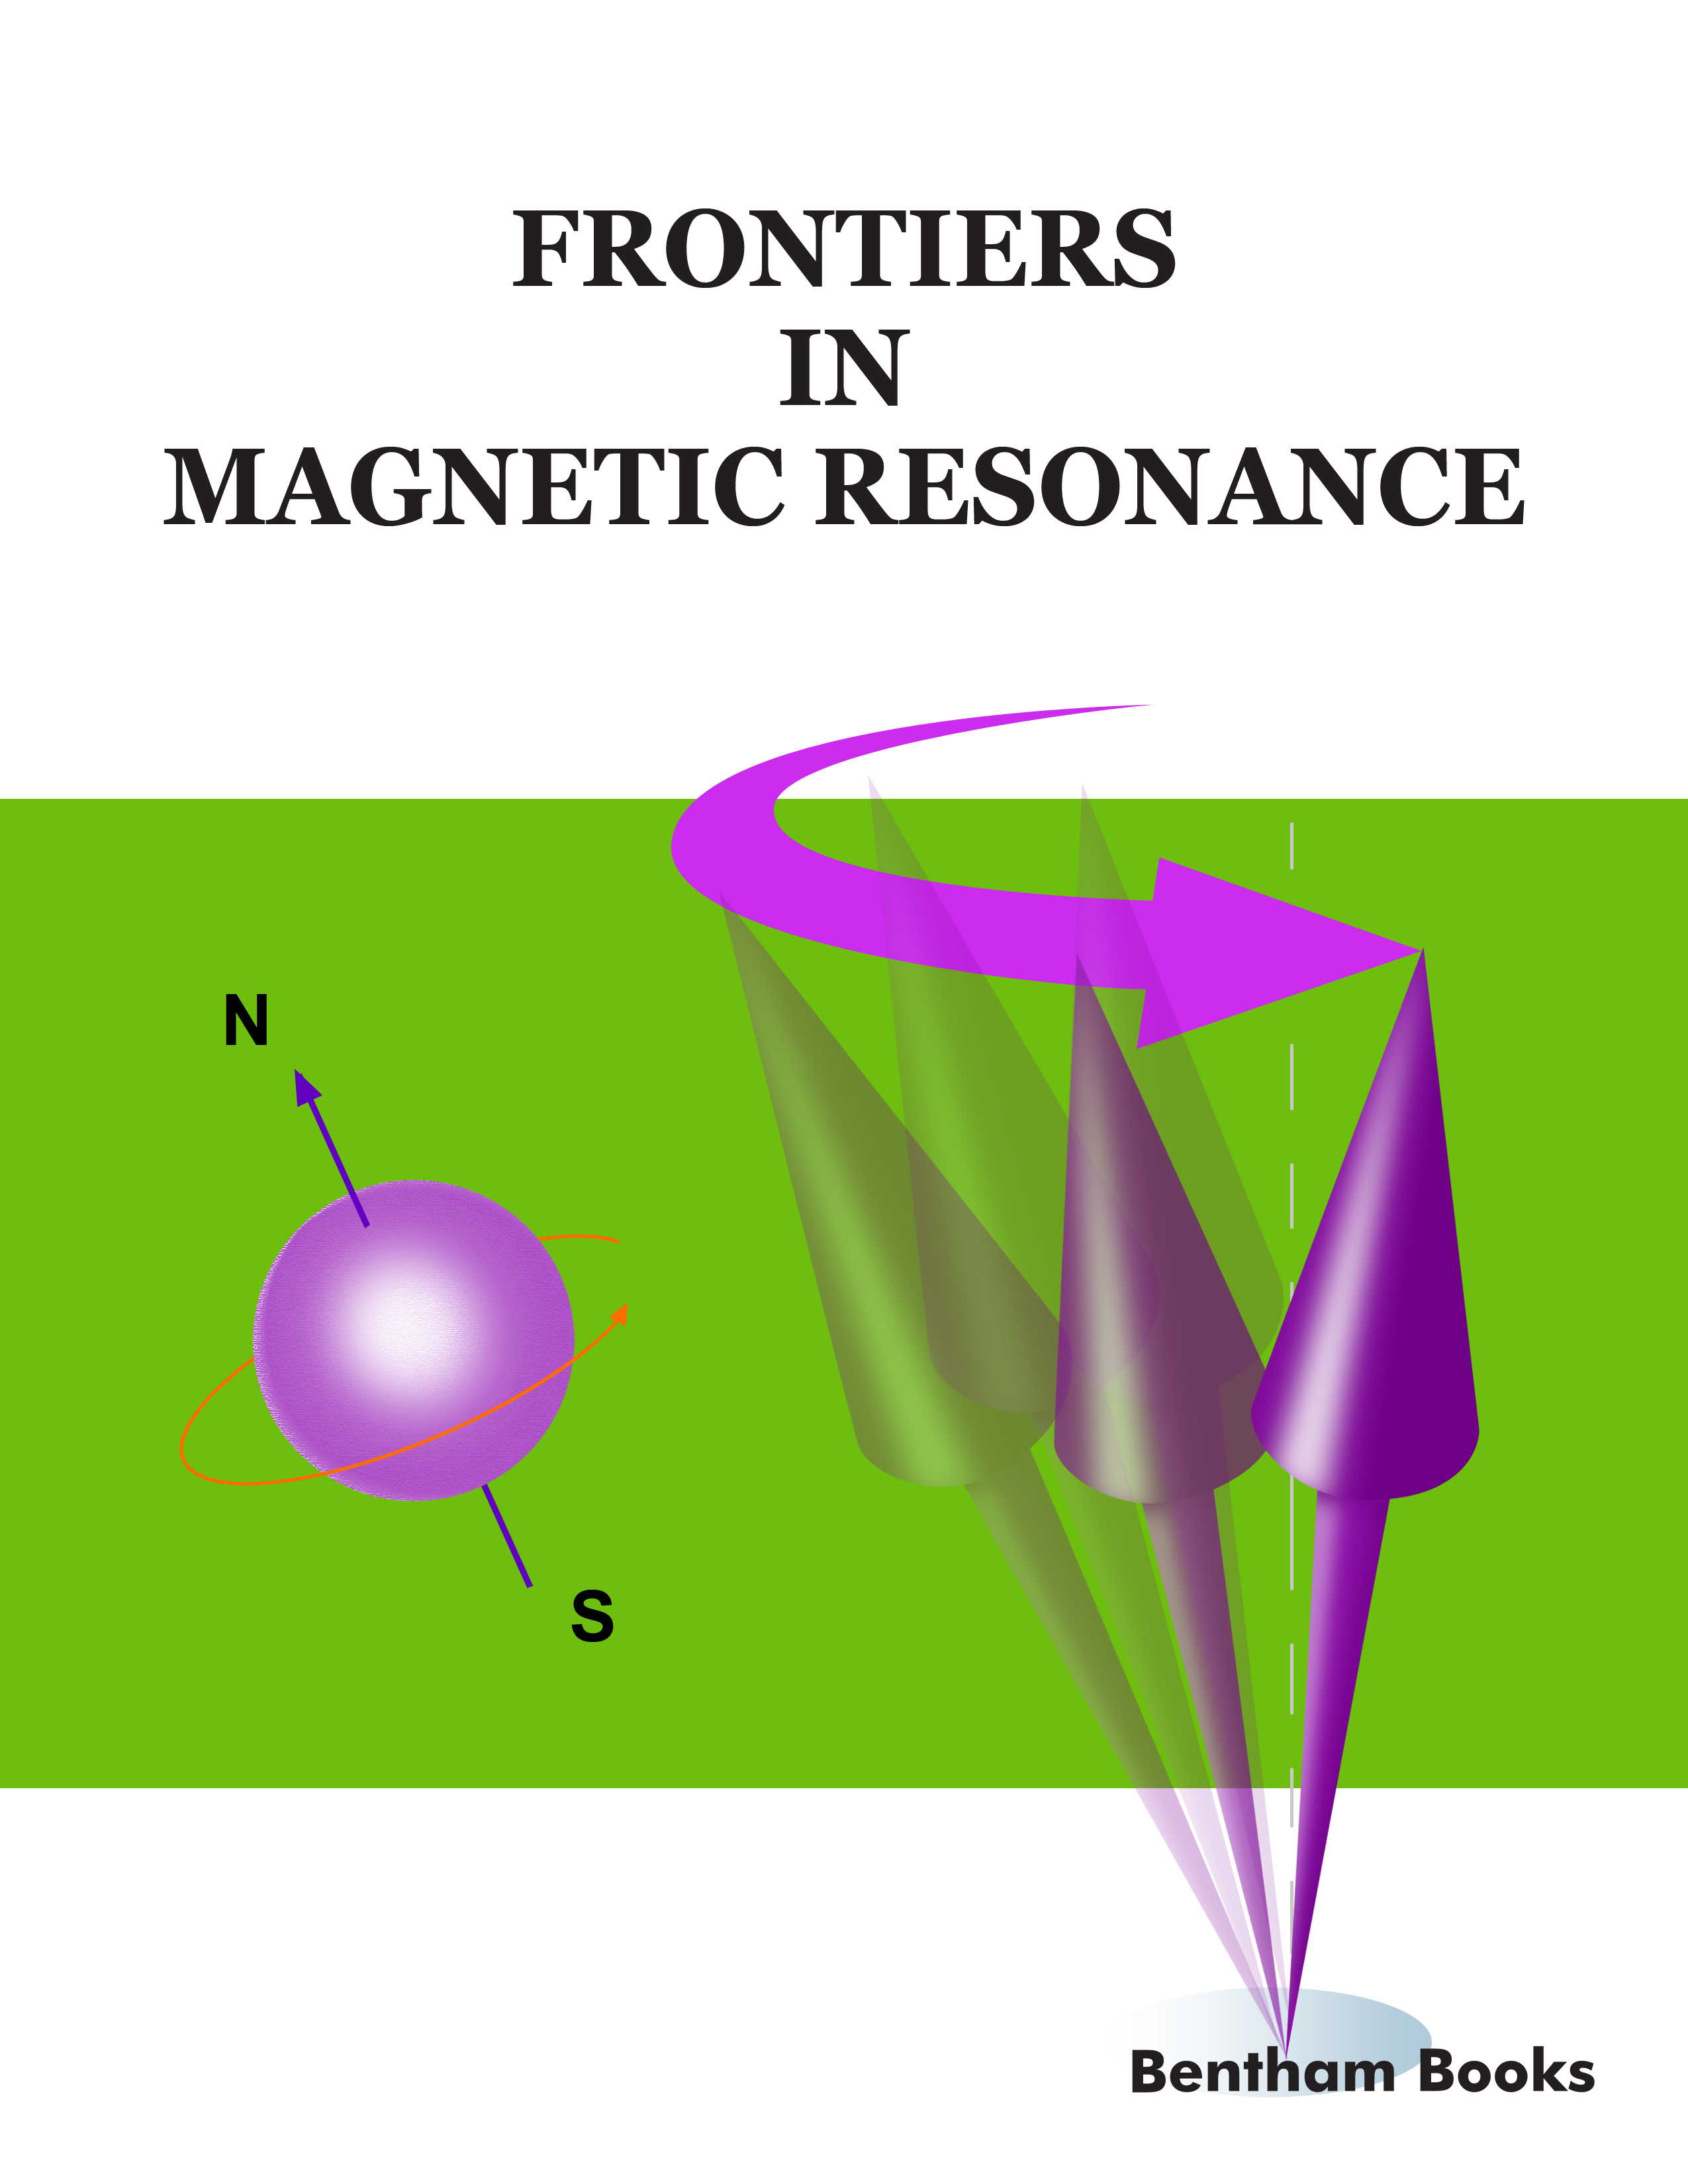 Frontiers in Magnetic Resonance